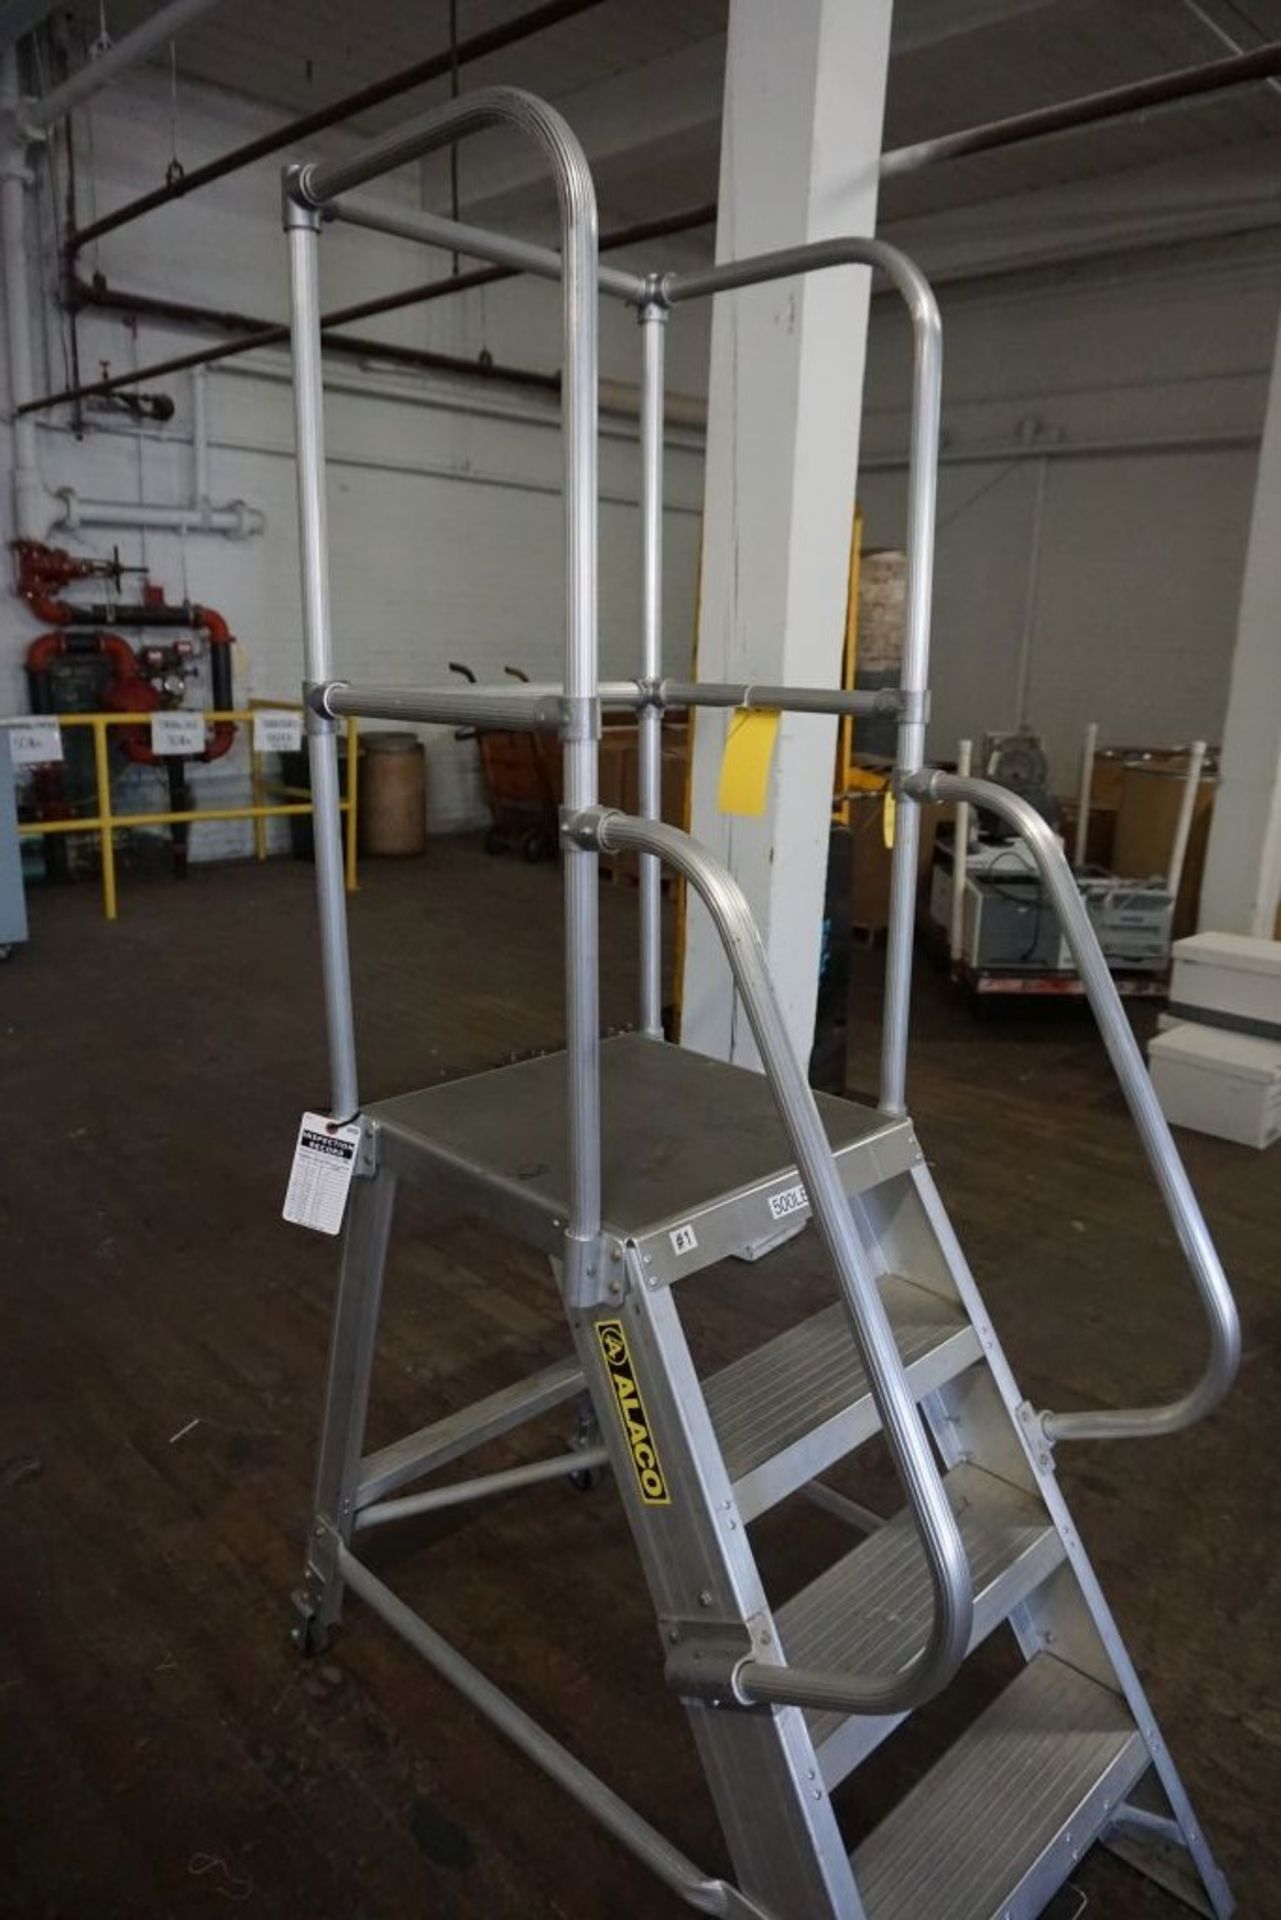 Alaco Portable Stairs|36" Platform Height|Lot Tag: 1052 - Image 3 of 4